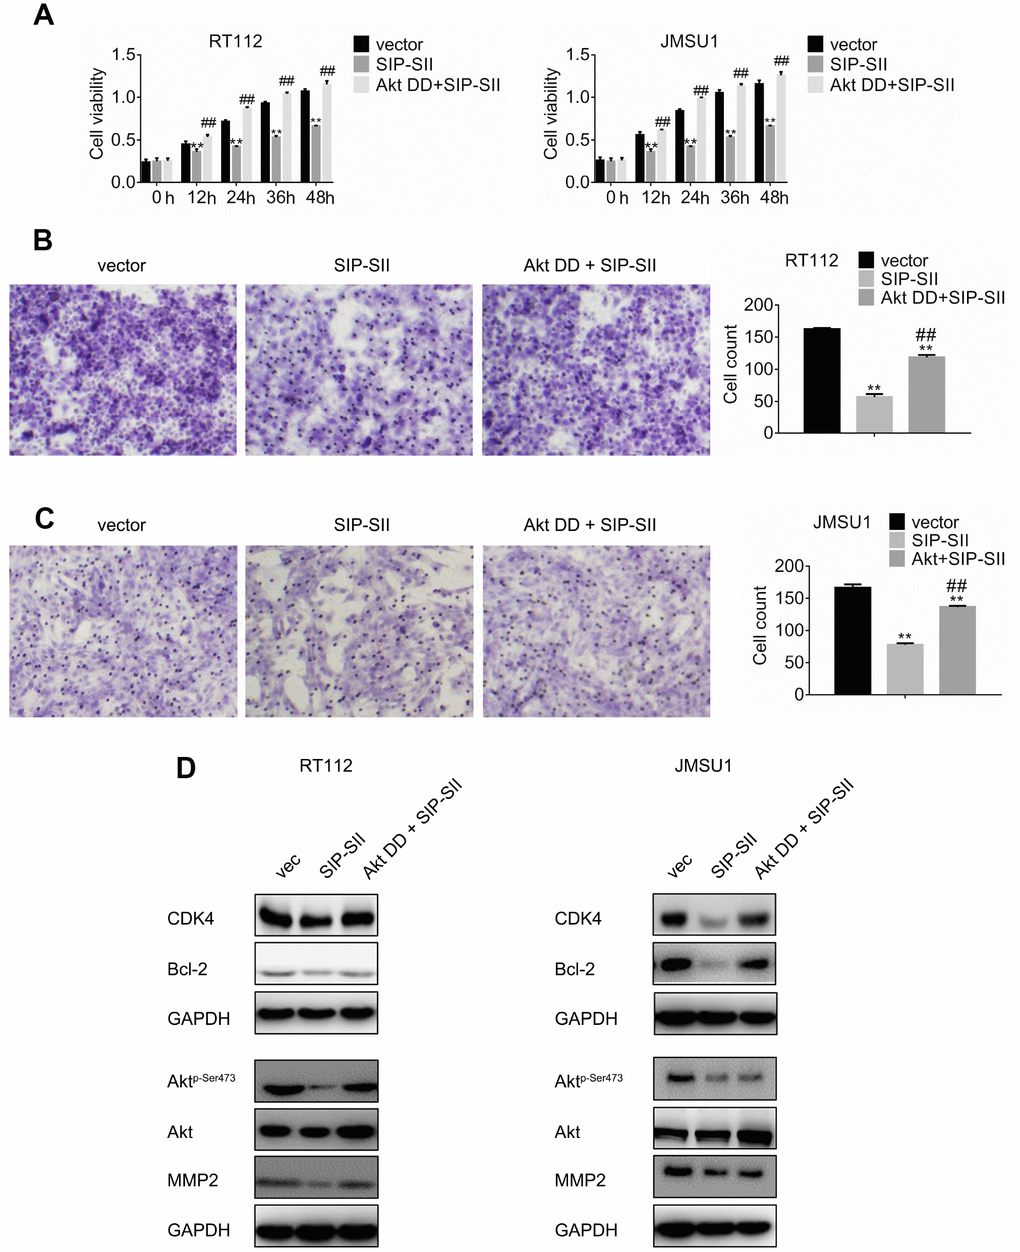 Overexpression of Akt DD abrogates SIP-SII inhibitory effects. (A) Cell viability assay results for RT112 and JMSU1 cells treated with the FLAG-HA empty vector and DMSO (control), 5.0 μM SIP-SII, or SIP-SII combined with Akt DD (PKB T308D S473D) for 24 h. Cell migration assay results for RT112 (B) and JMSU1 cells (C) treated with SIP-SII alone or in combination with Akt DD for 24 h. Representative images at 200x magnification. Data are mean ± SD (error bars) of three experiments performed in triplicate. **P D) and JMSU1 (E) cells treated with SIP-SII alone or in combination with Akt DD for 24 h.